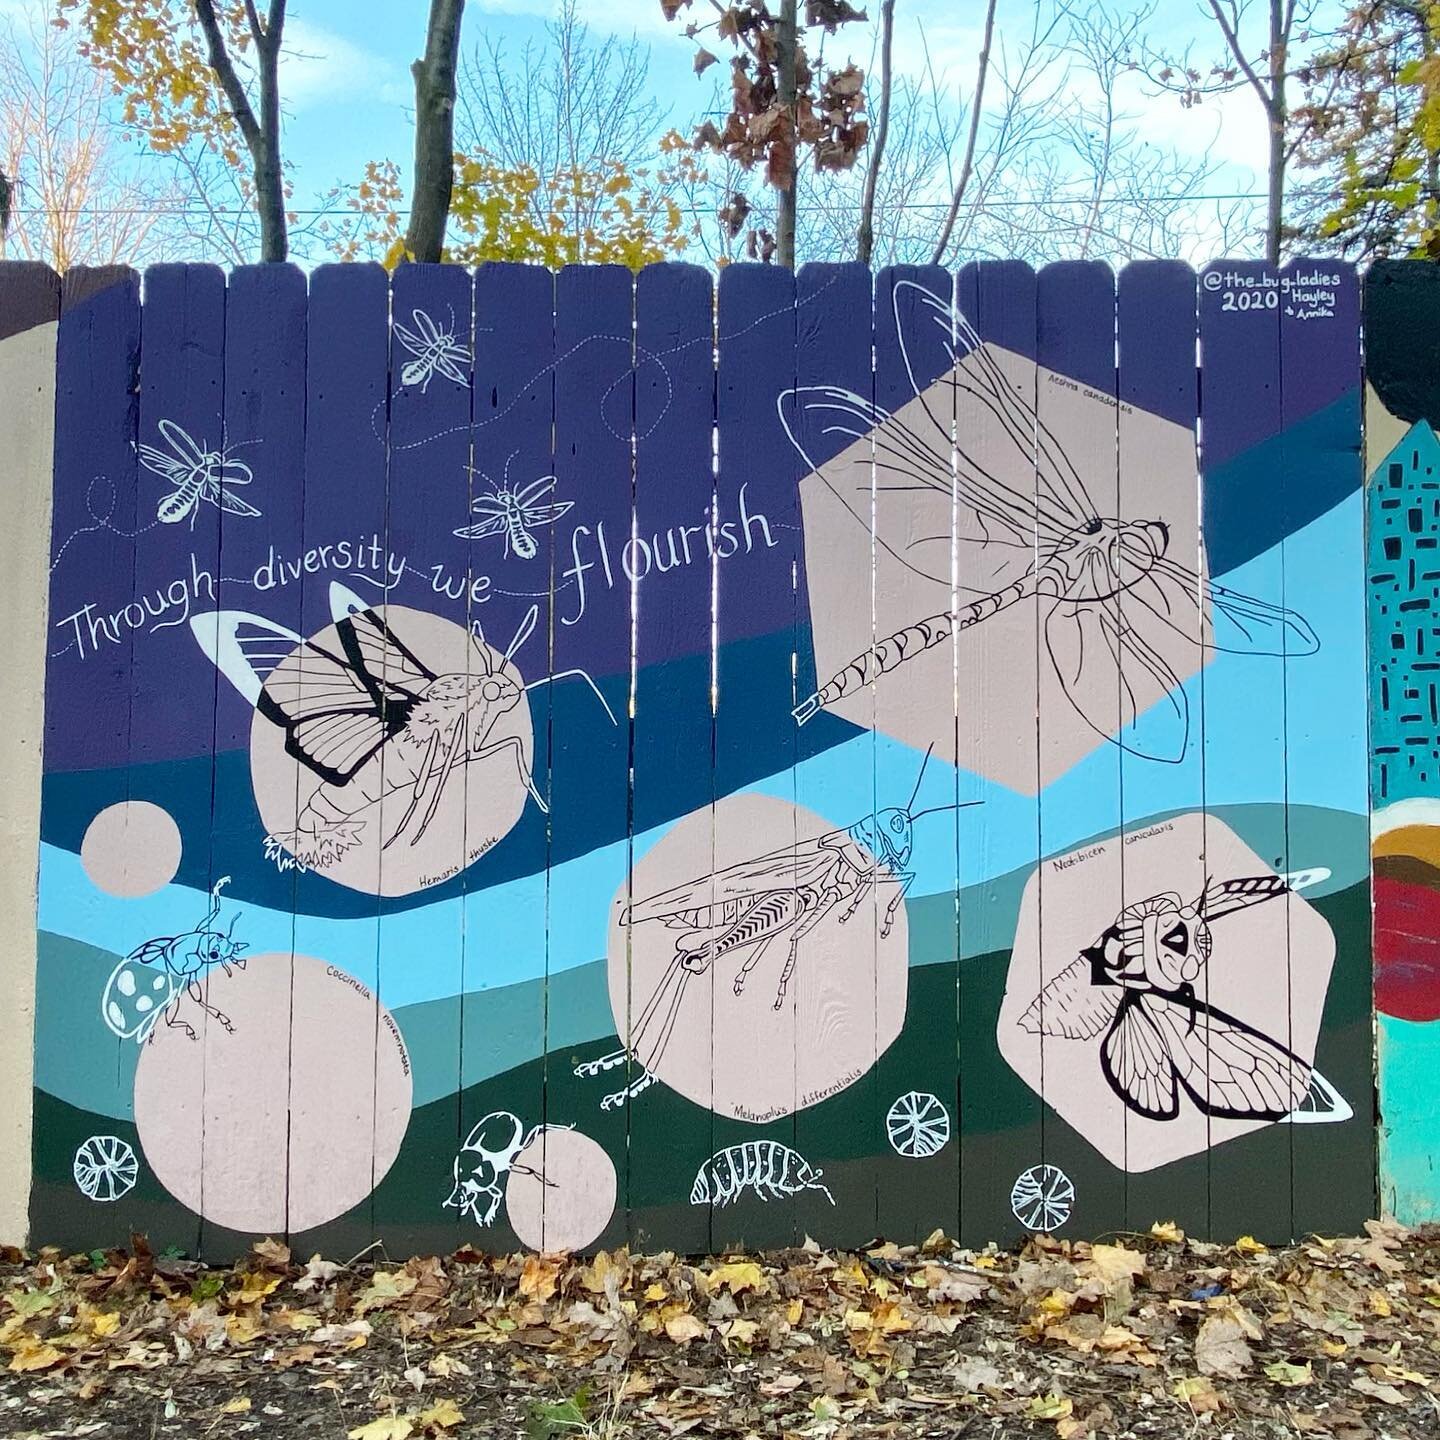 The mural is done!! If you&rsquo;re in Ithaca, swing by the South Hill rec trail to check it out! We&rsquo;re really proud of how our very first mural turned out 😁 many many thanks to Caleb @ithacamurals for believing in us and helping make this hap